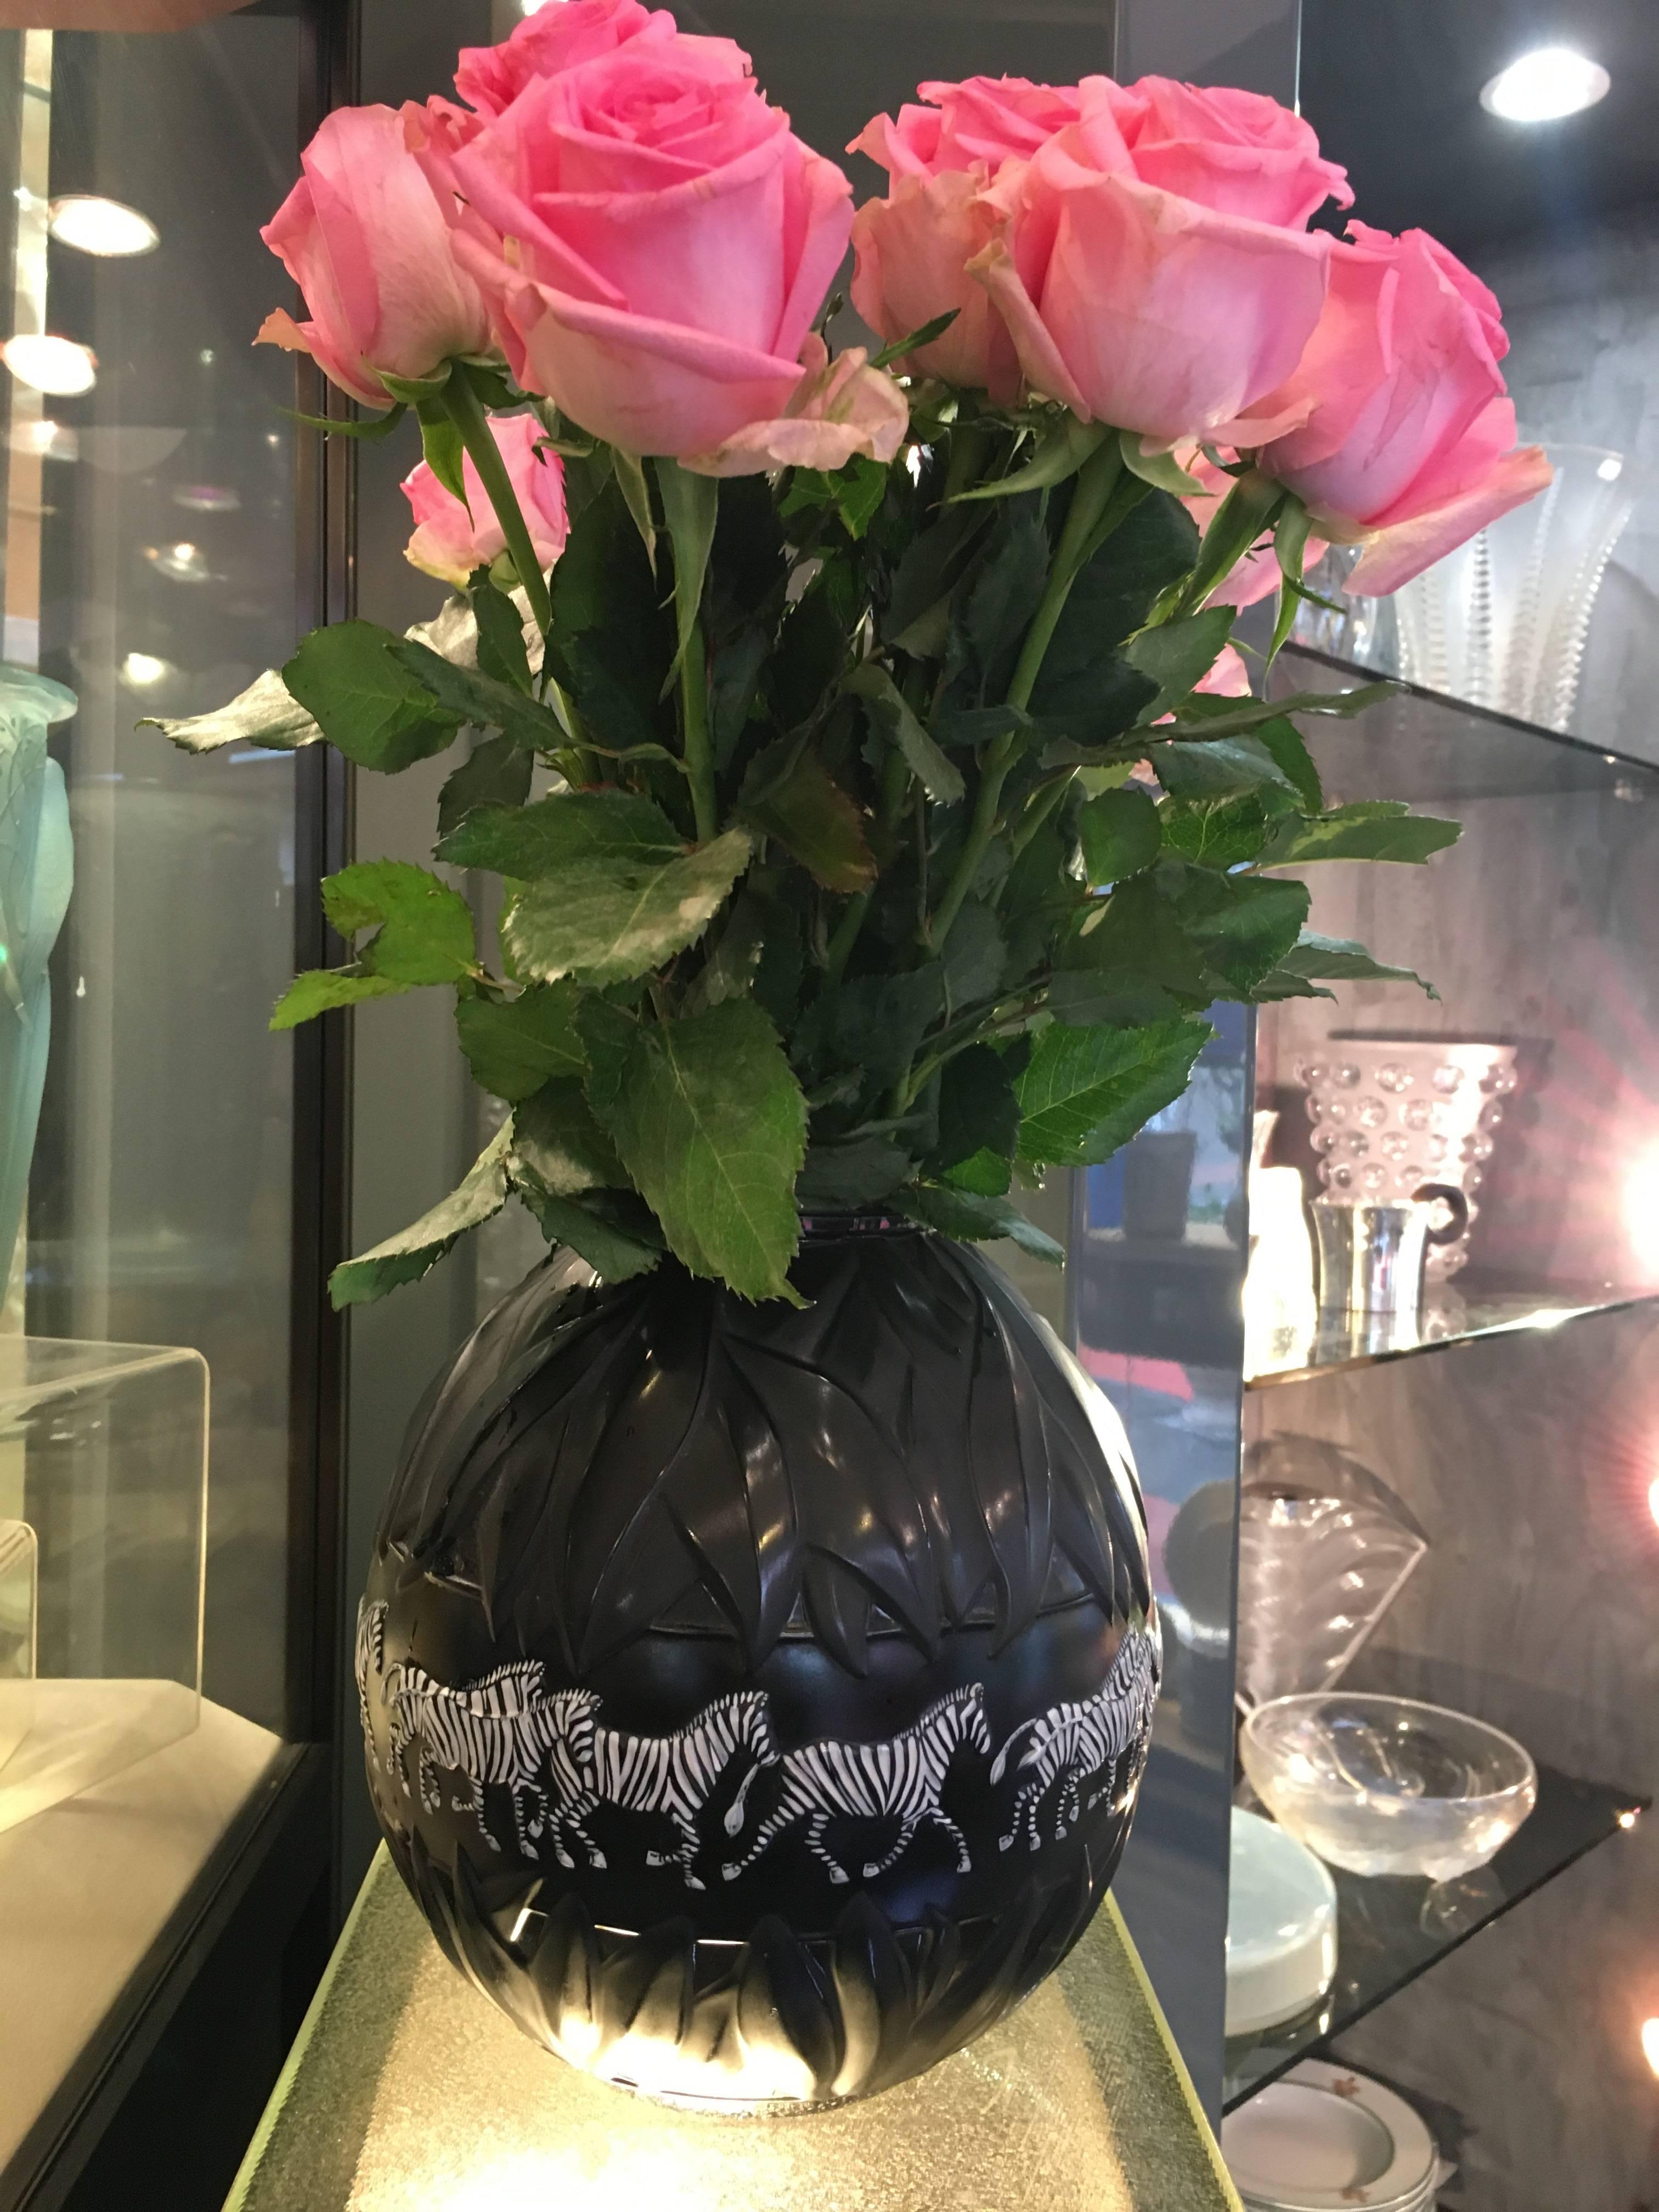 Lalique, France.
A Lalique black moulded glass Tanzania zebra vase, etched Lalique, France 174, modern
Inspired by the elaborate techniques of her grandfather, Marie-Claude Lalique has created a long, slender-necked vase in black crystal. This